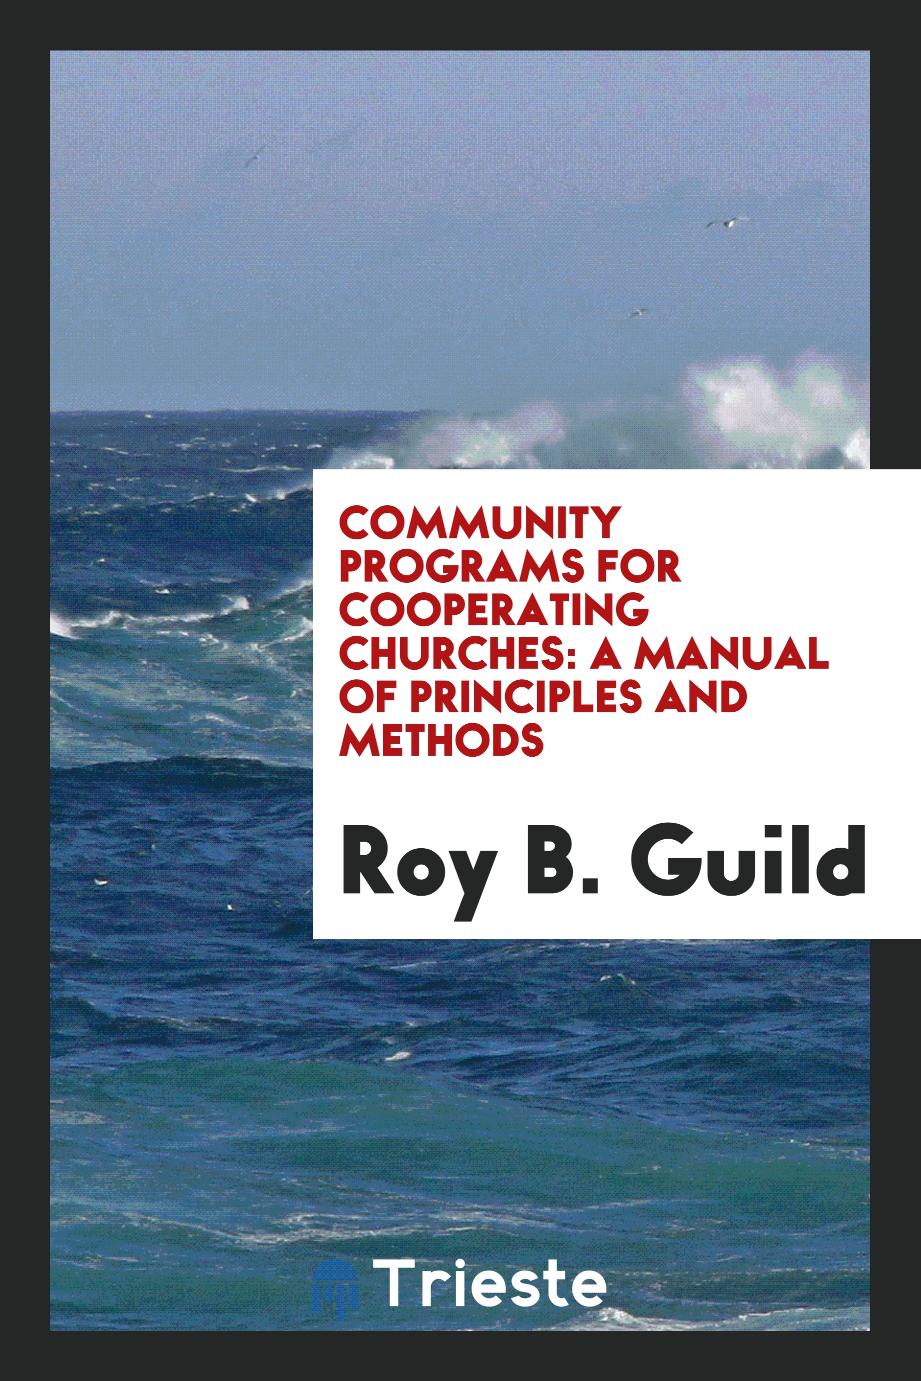 Community programs for cooperating churches: a manual of principles and methods